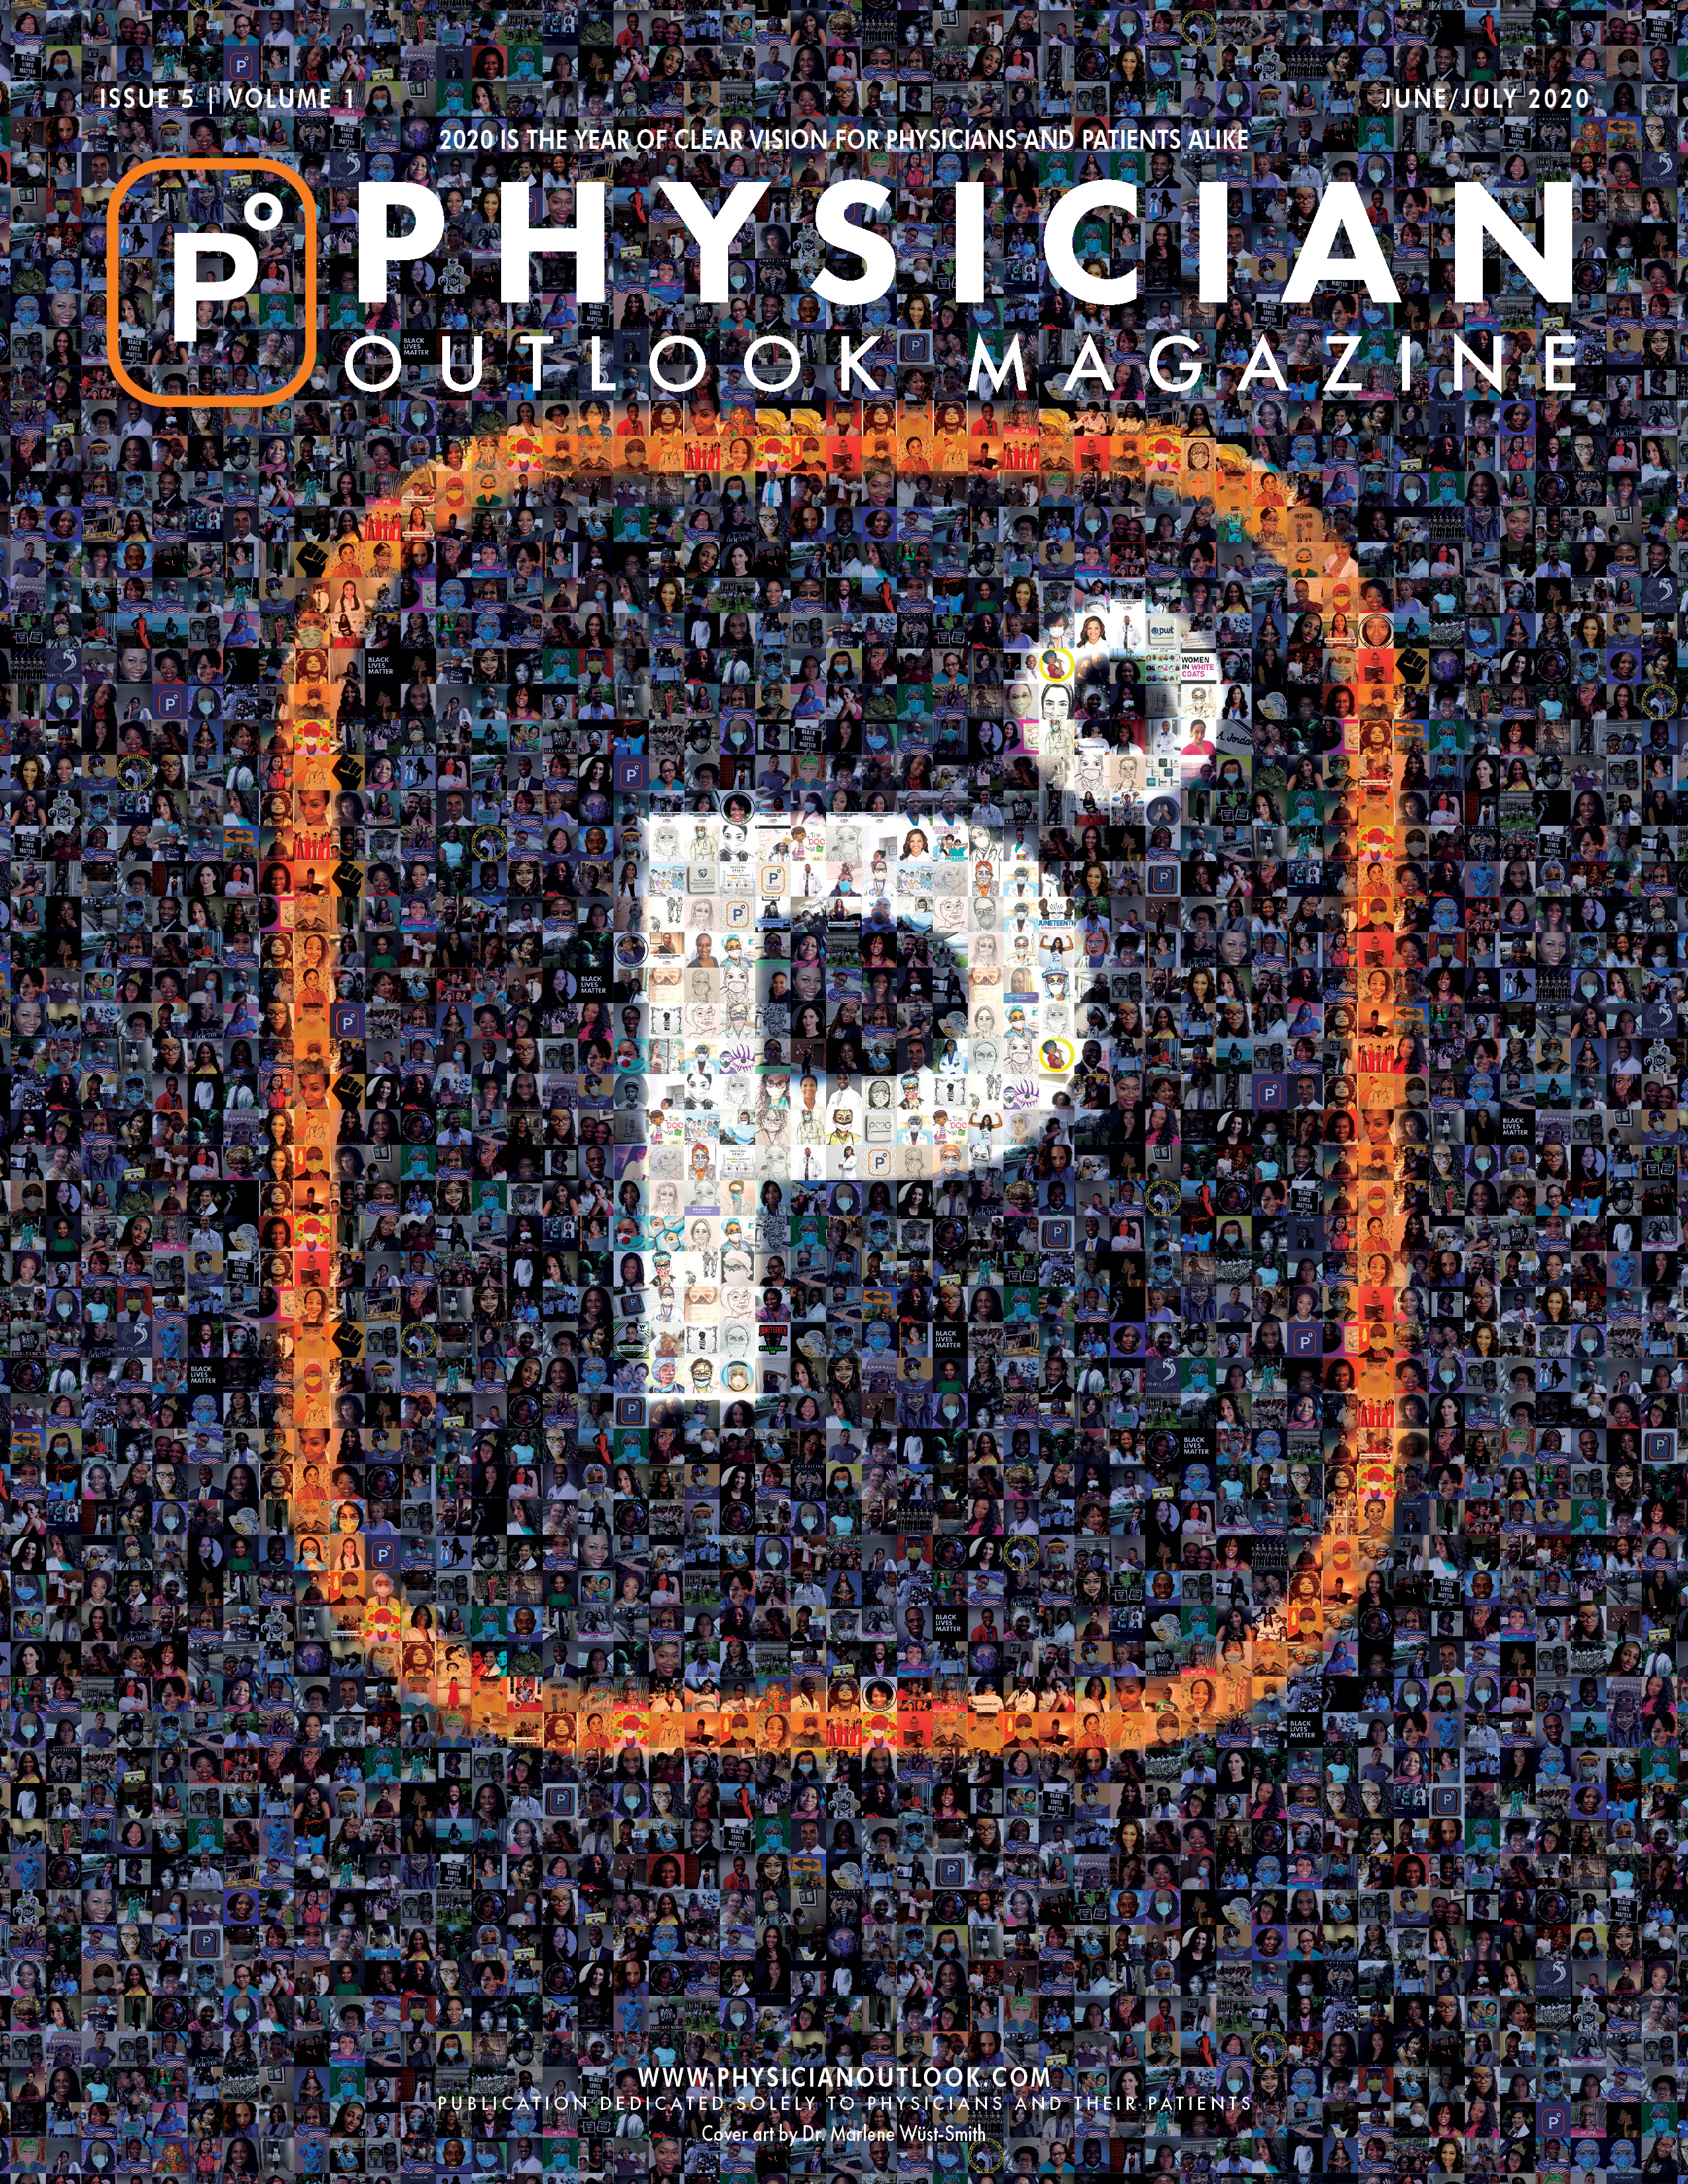 Physician Outlook - Best Illustrated Cover